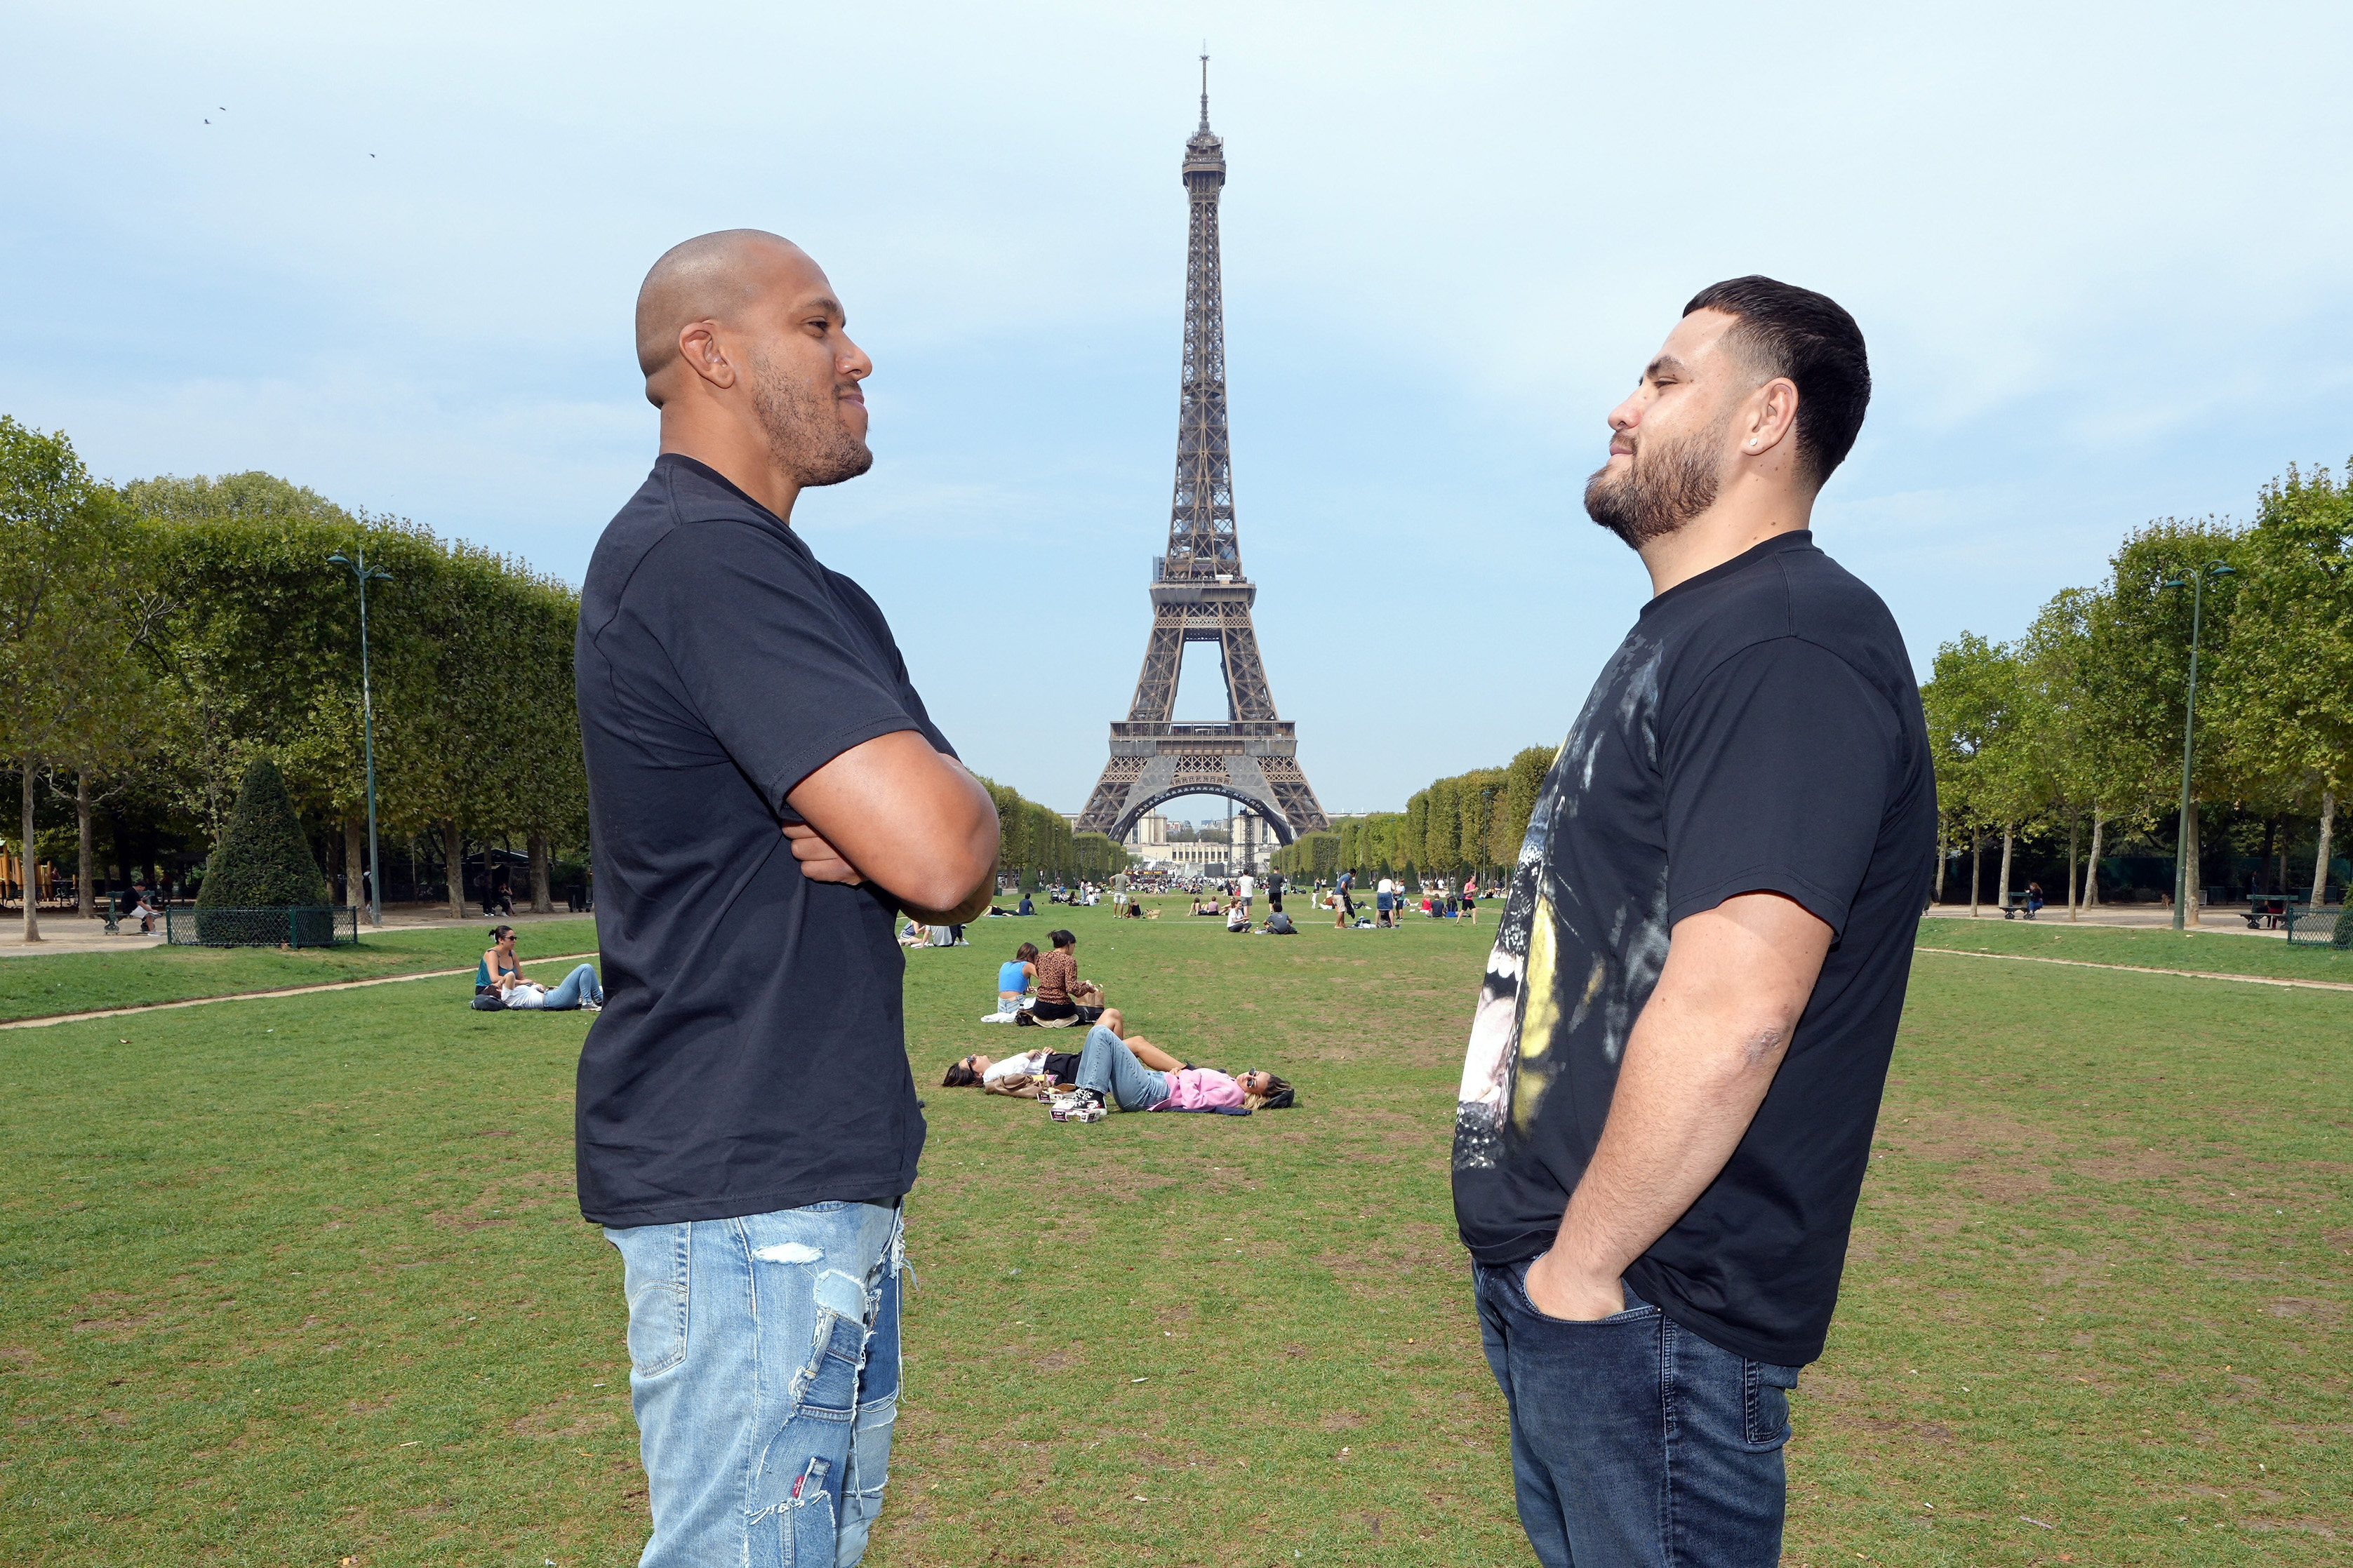 (L-R) Ciryl Gane of France and Tai Tuivasa of Australia face off during a UFC photo session at Champ de Mars on August 30, 2022 in Paris, France.